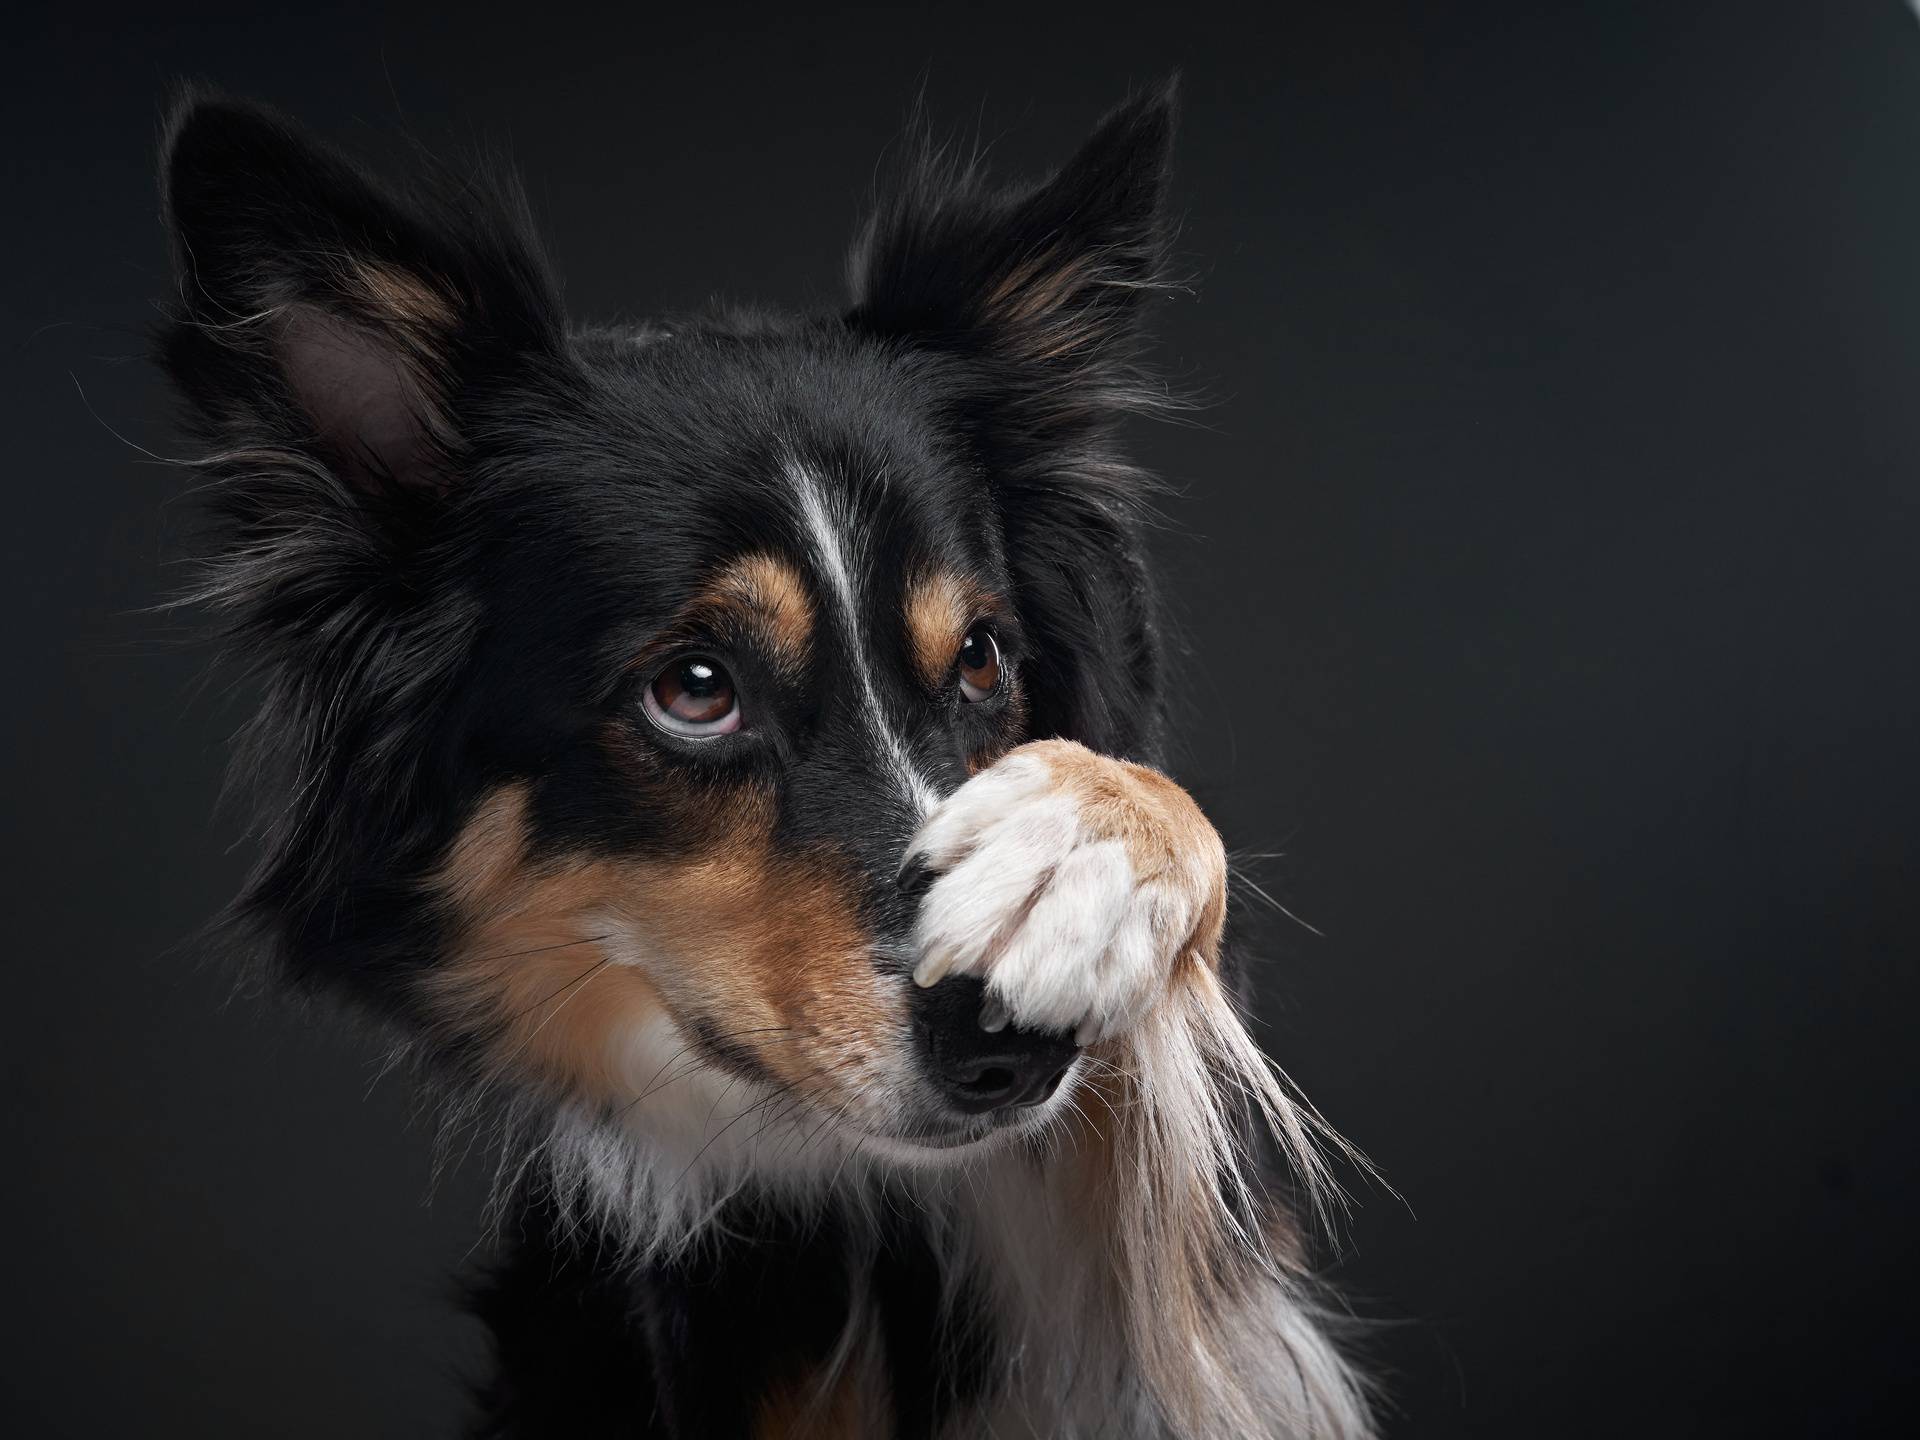 the dog snarls. Funny expression on the muzzle of a border collie